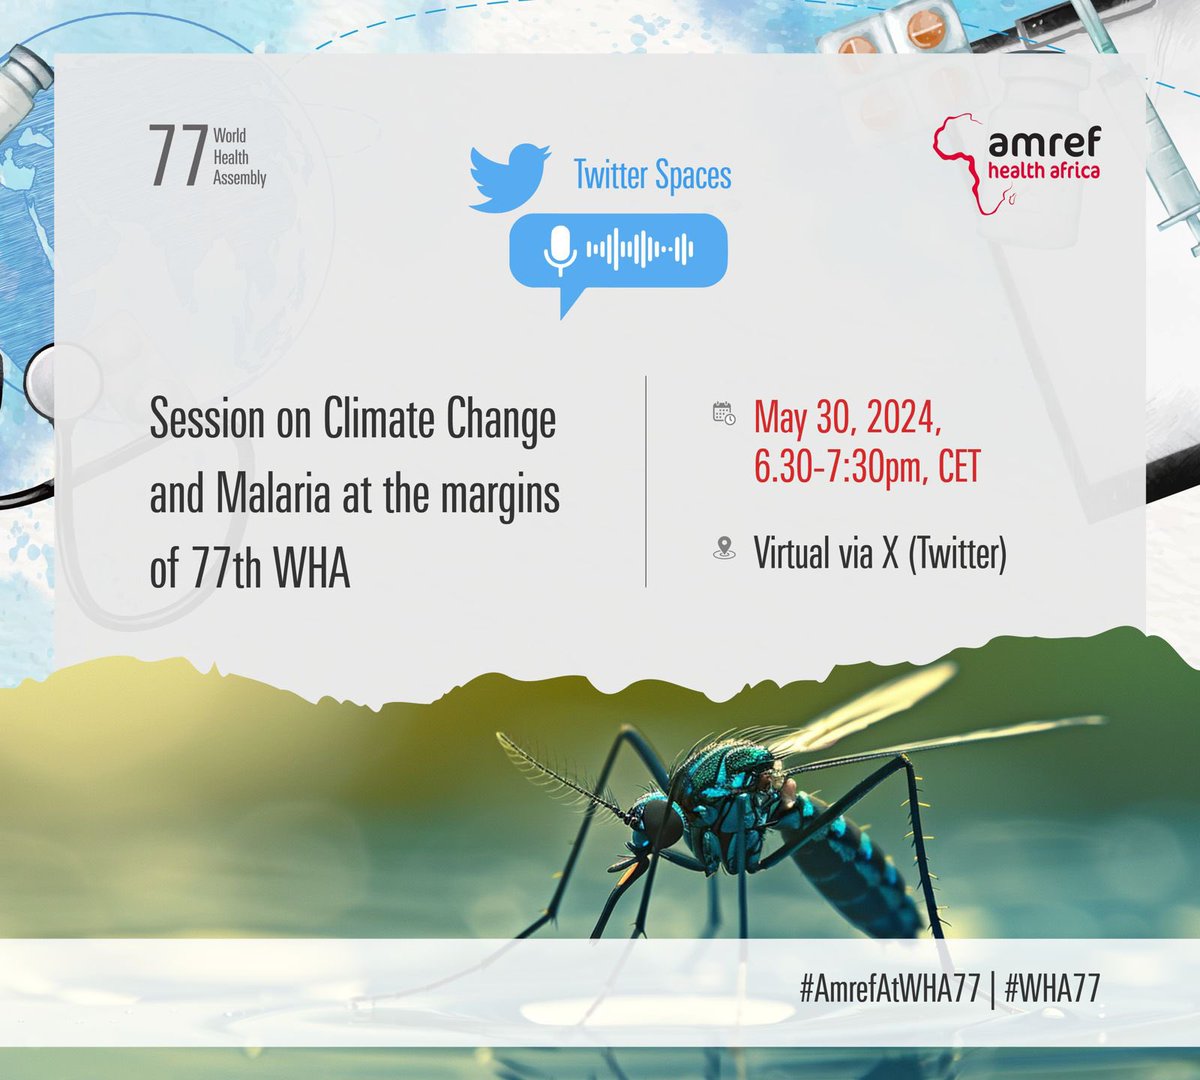 Mark your calendars! 

On May 30th at 6:30 PM CET, join our discussion on #ClimateChange and its impact on #Malaria, and learn how we can achieve health equity in Africa.

 #WHA77 #AmrefAtWHA77